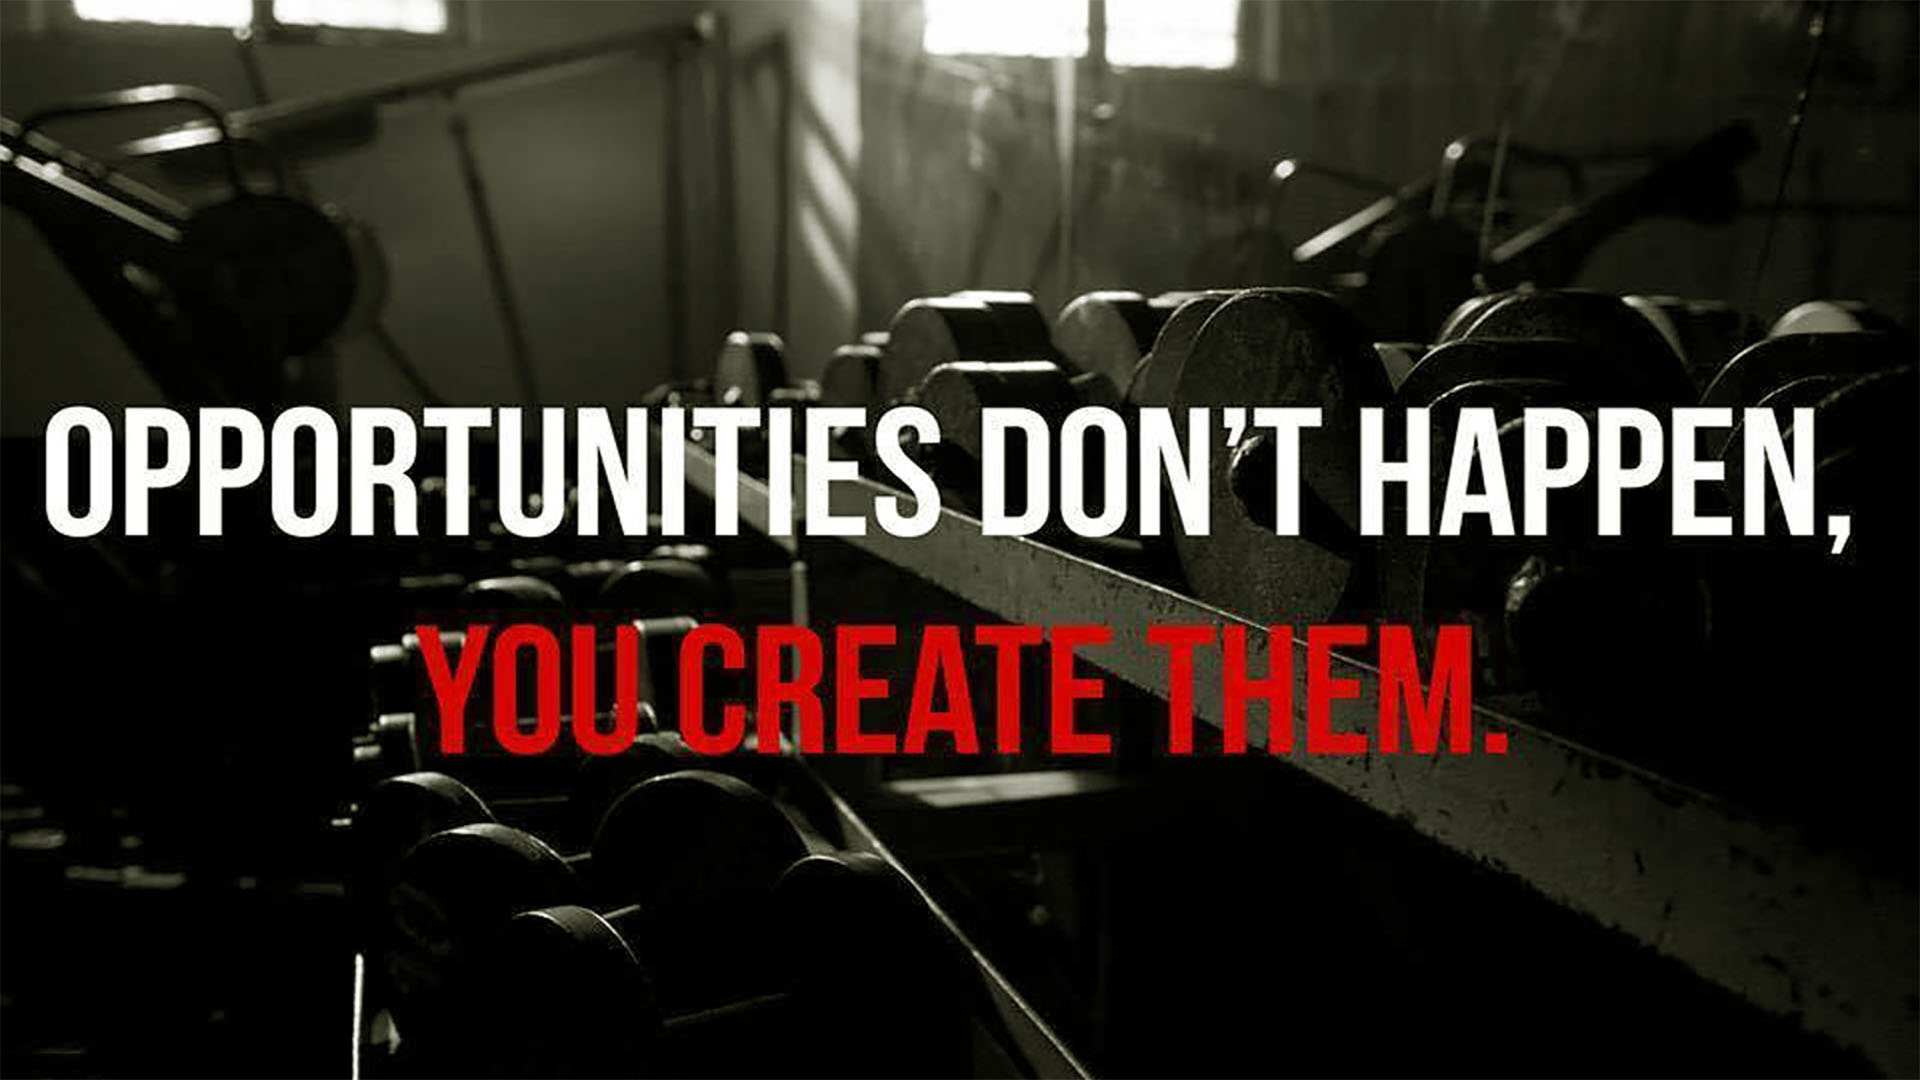 Opportunities Dont Happen You Create Them - Gym Motivation Life Quotes - HD Wallpaper 